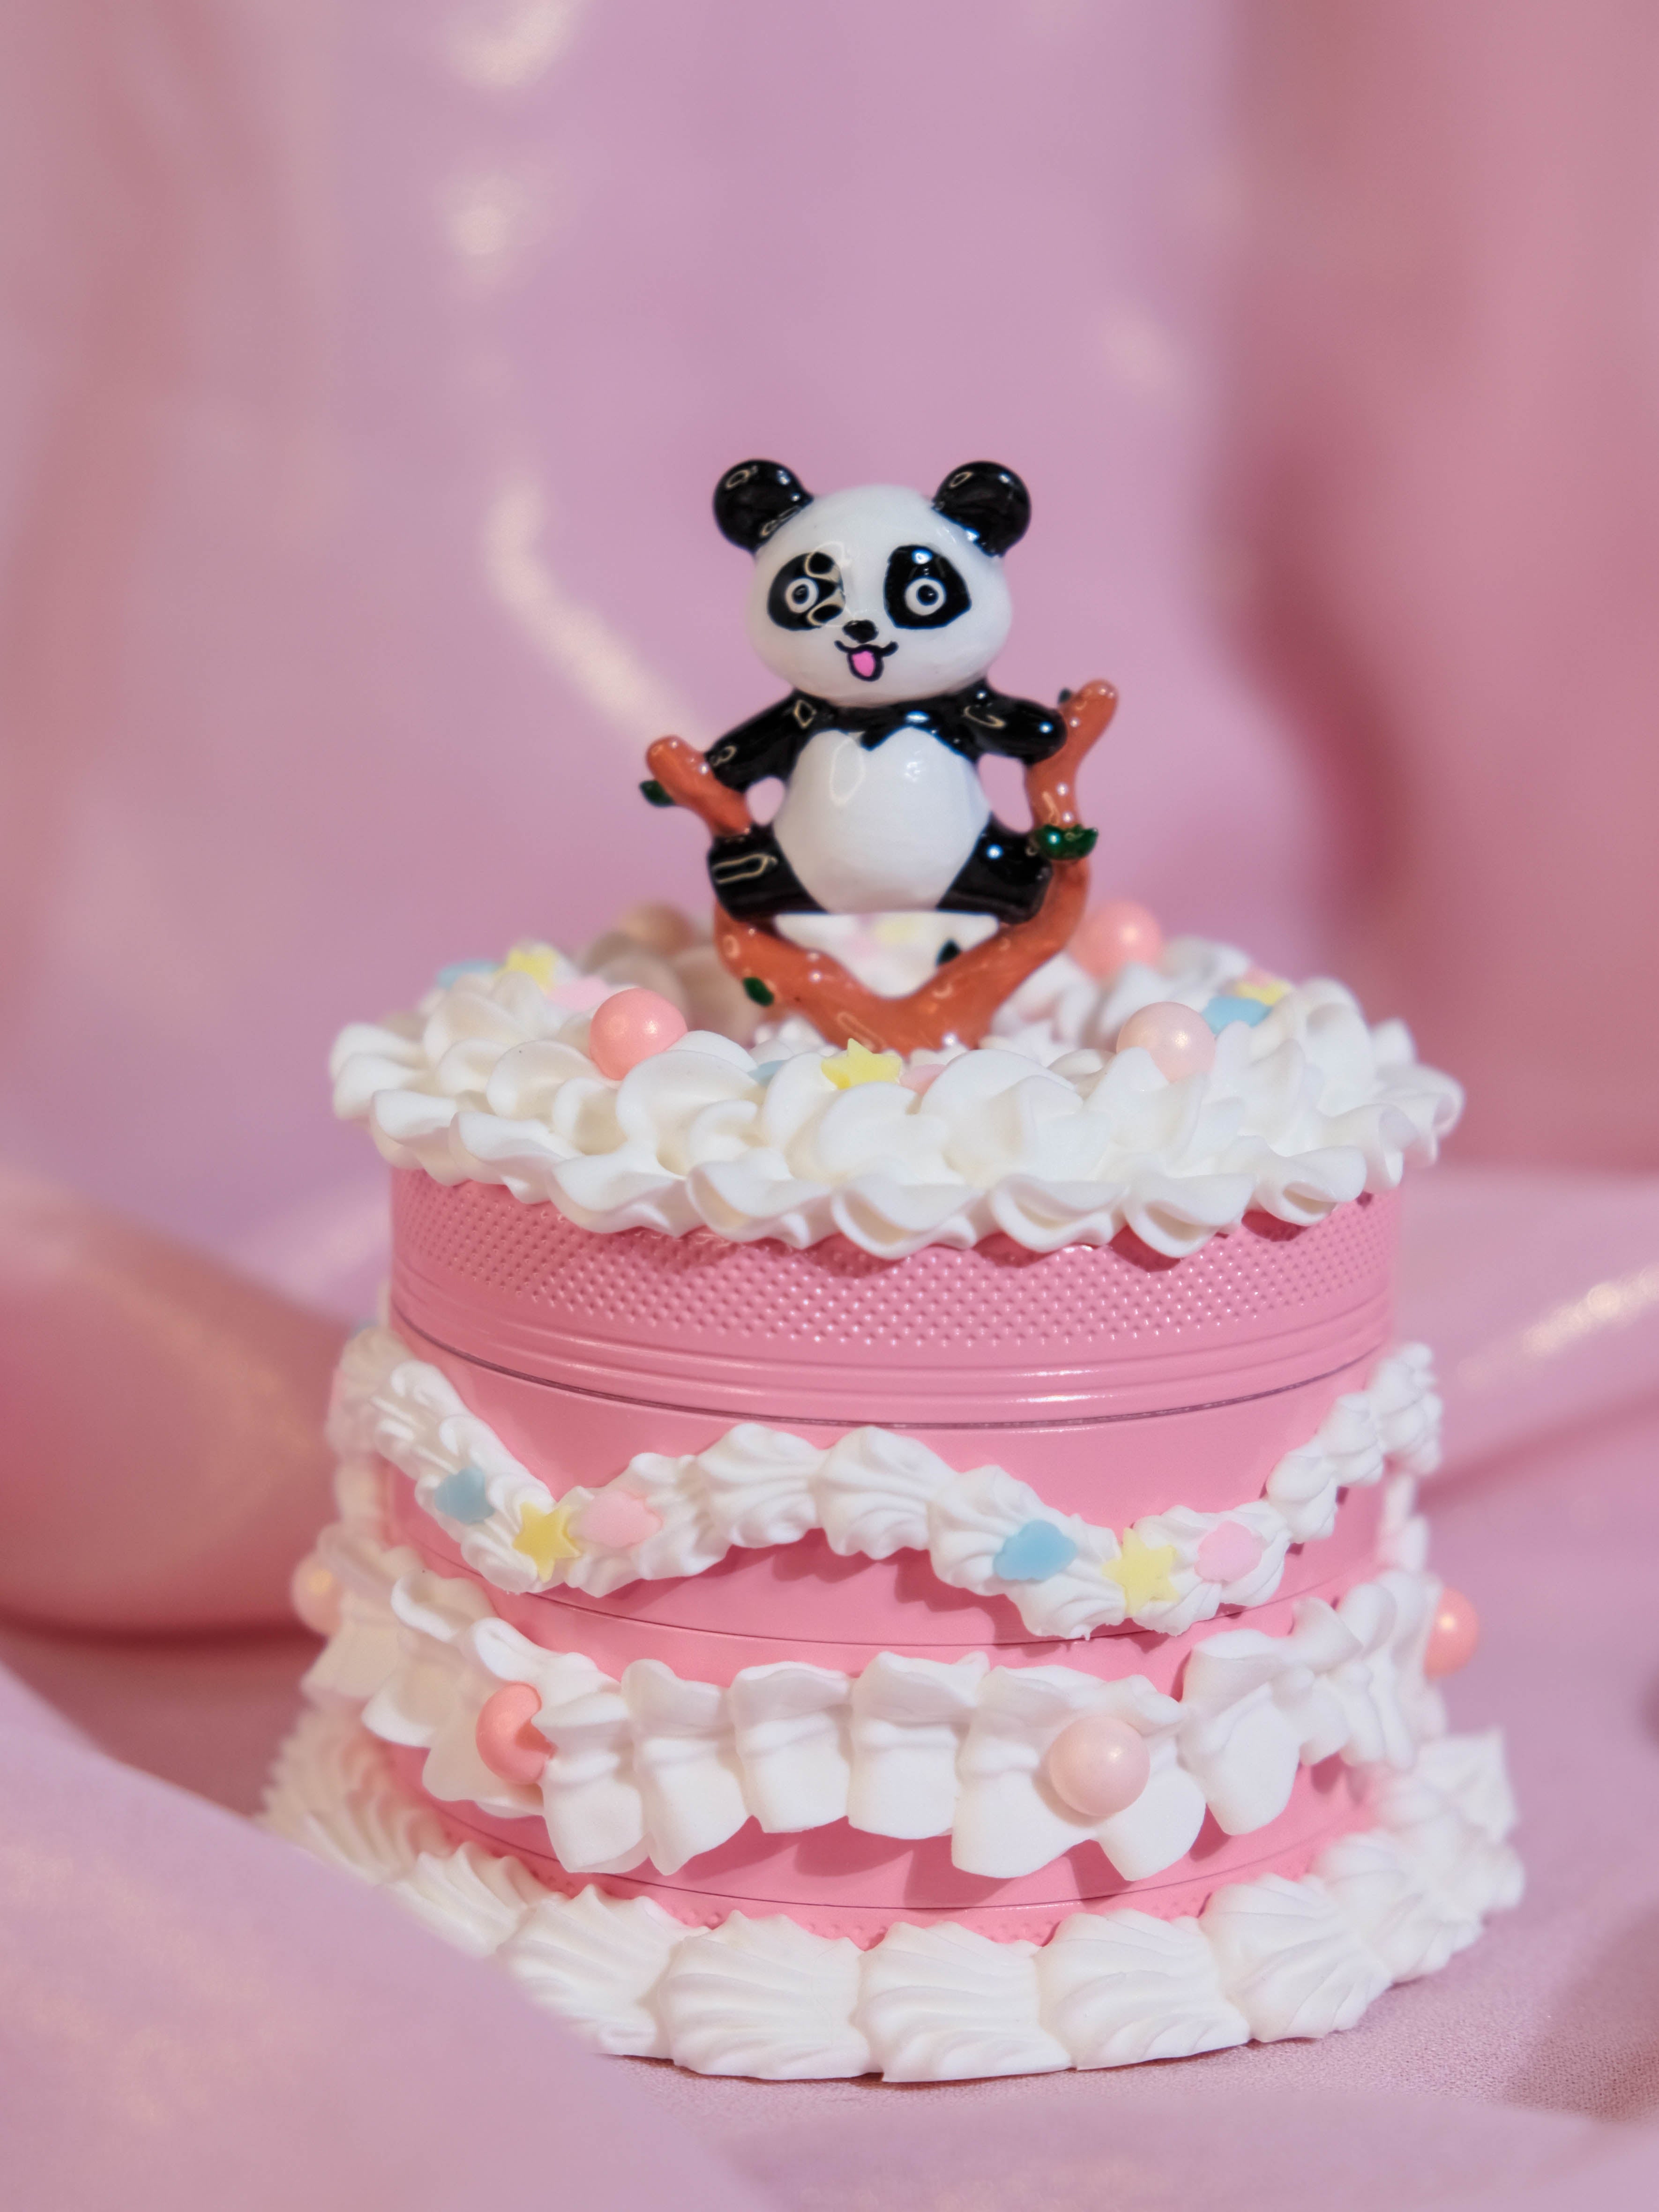 15 Panda Cake Ideas That Are Absolutely Beautiful | Panda cakes, Panda bear  cake, Panda birthday cake